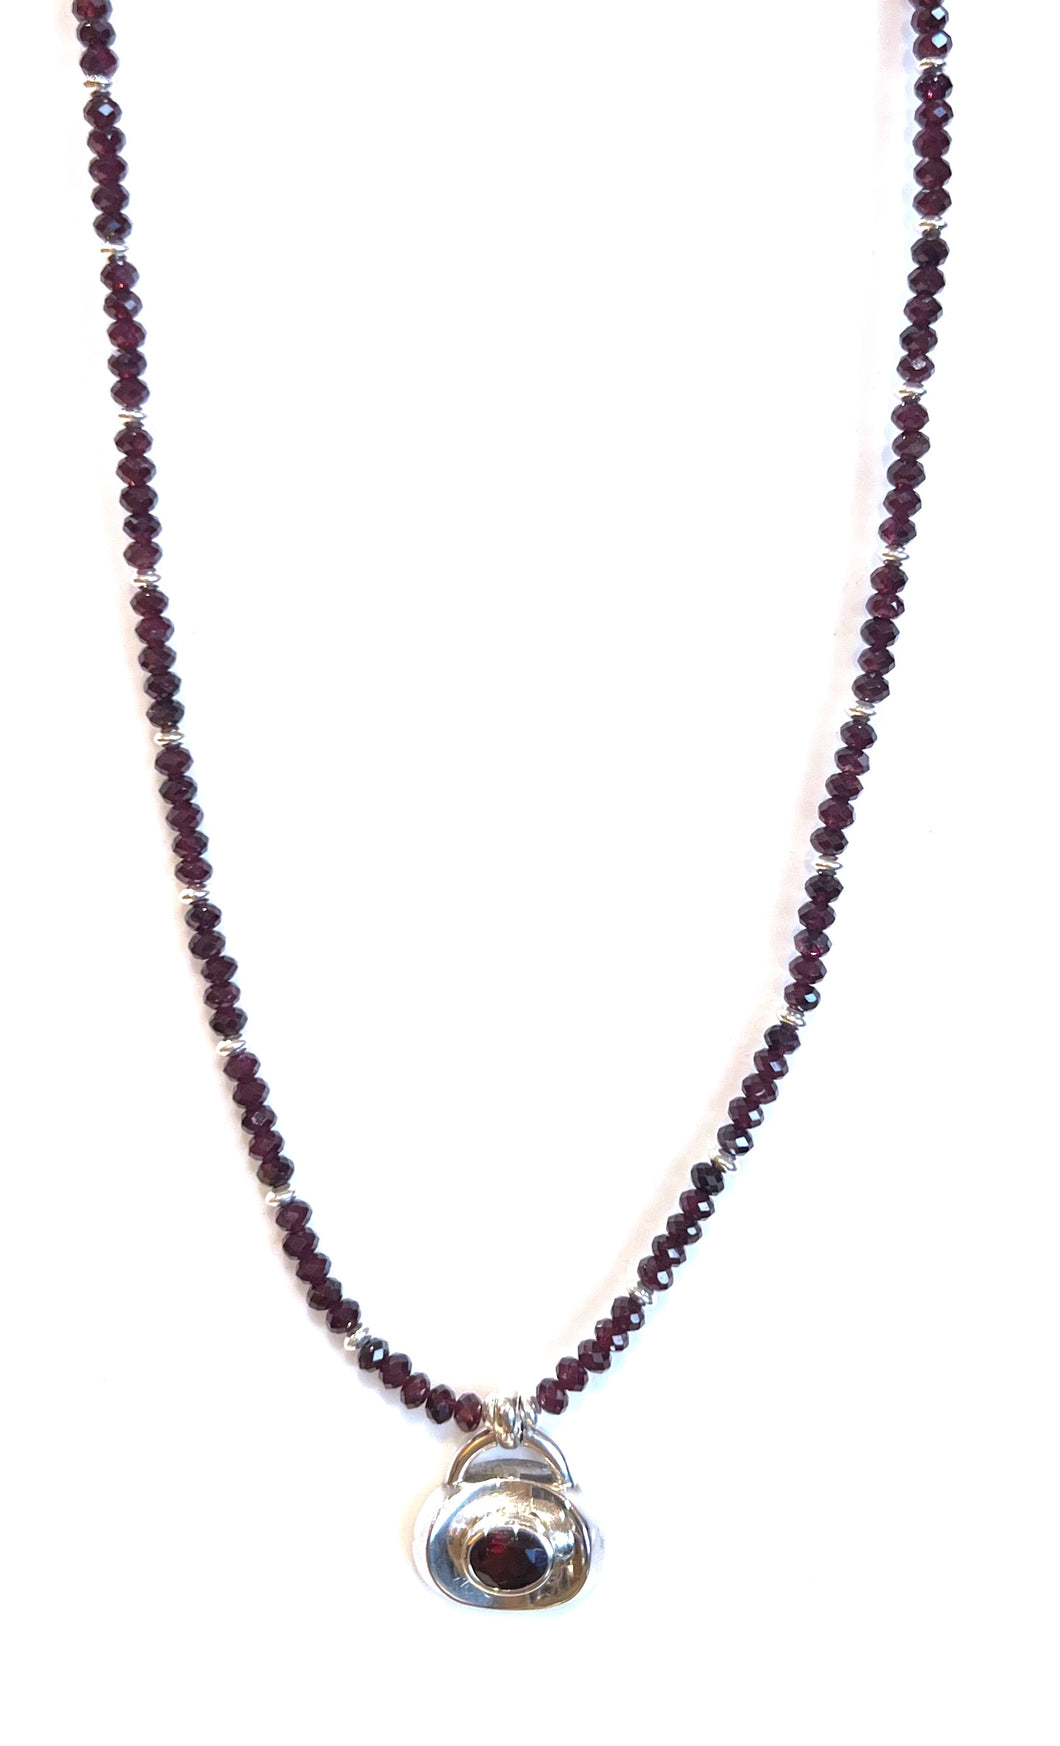 Australian Handmade Red Necklace with Garnets and Sterling Silver